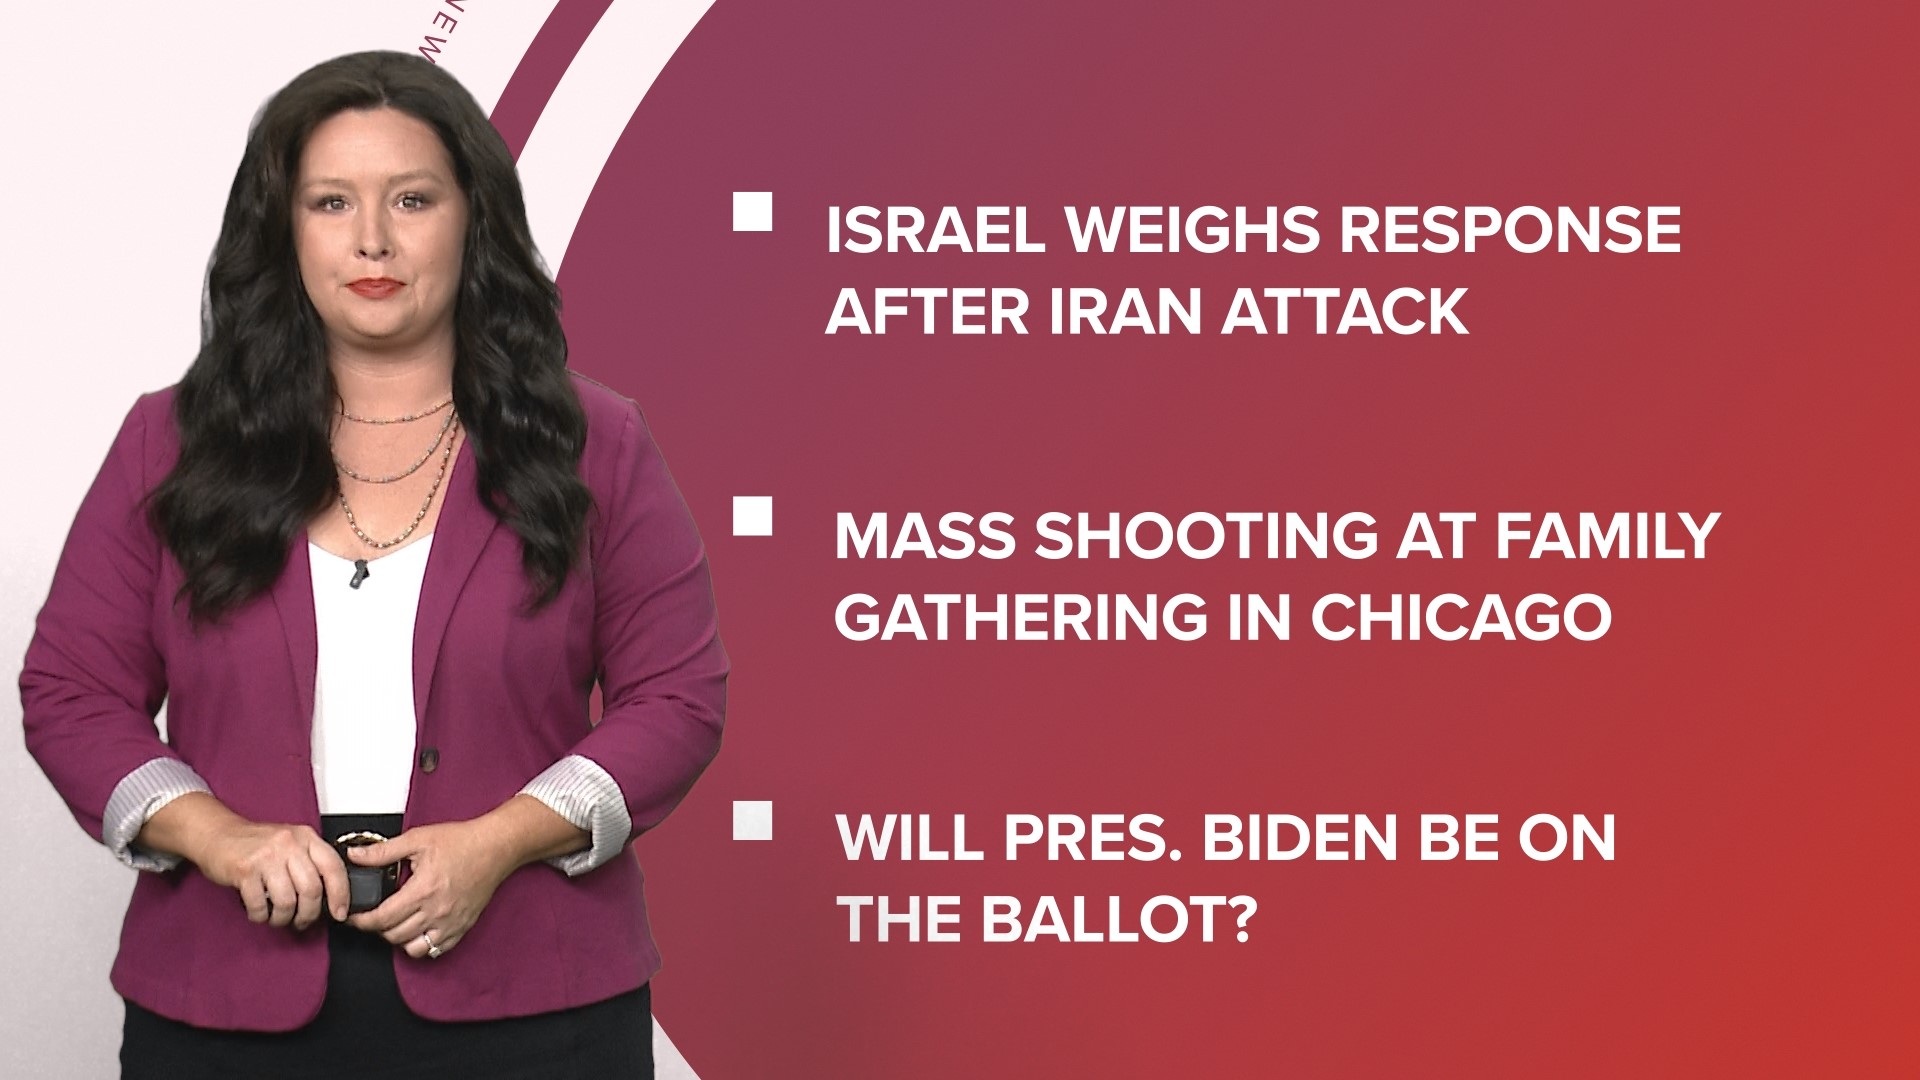 A look at what is happening in the news from a mass shooting in Chicago to President Biden's ballot issues and Scheffler's Masters win.